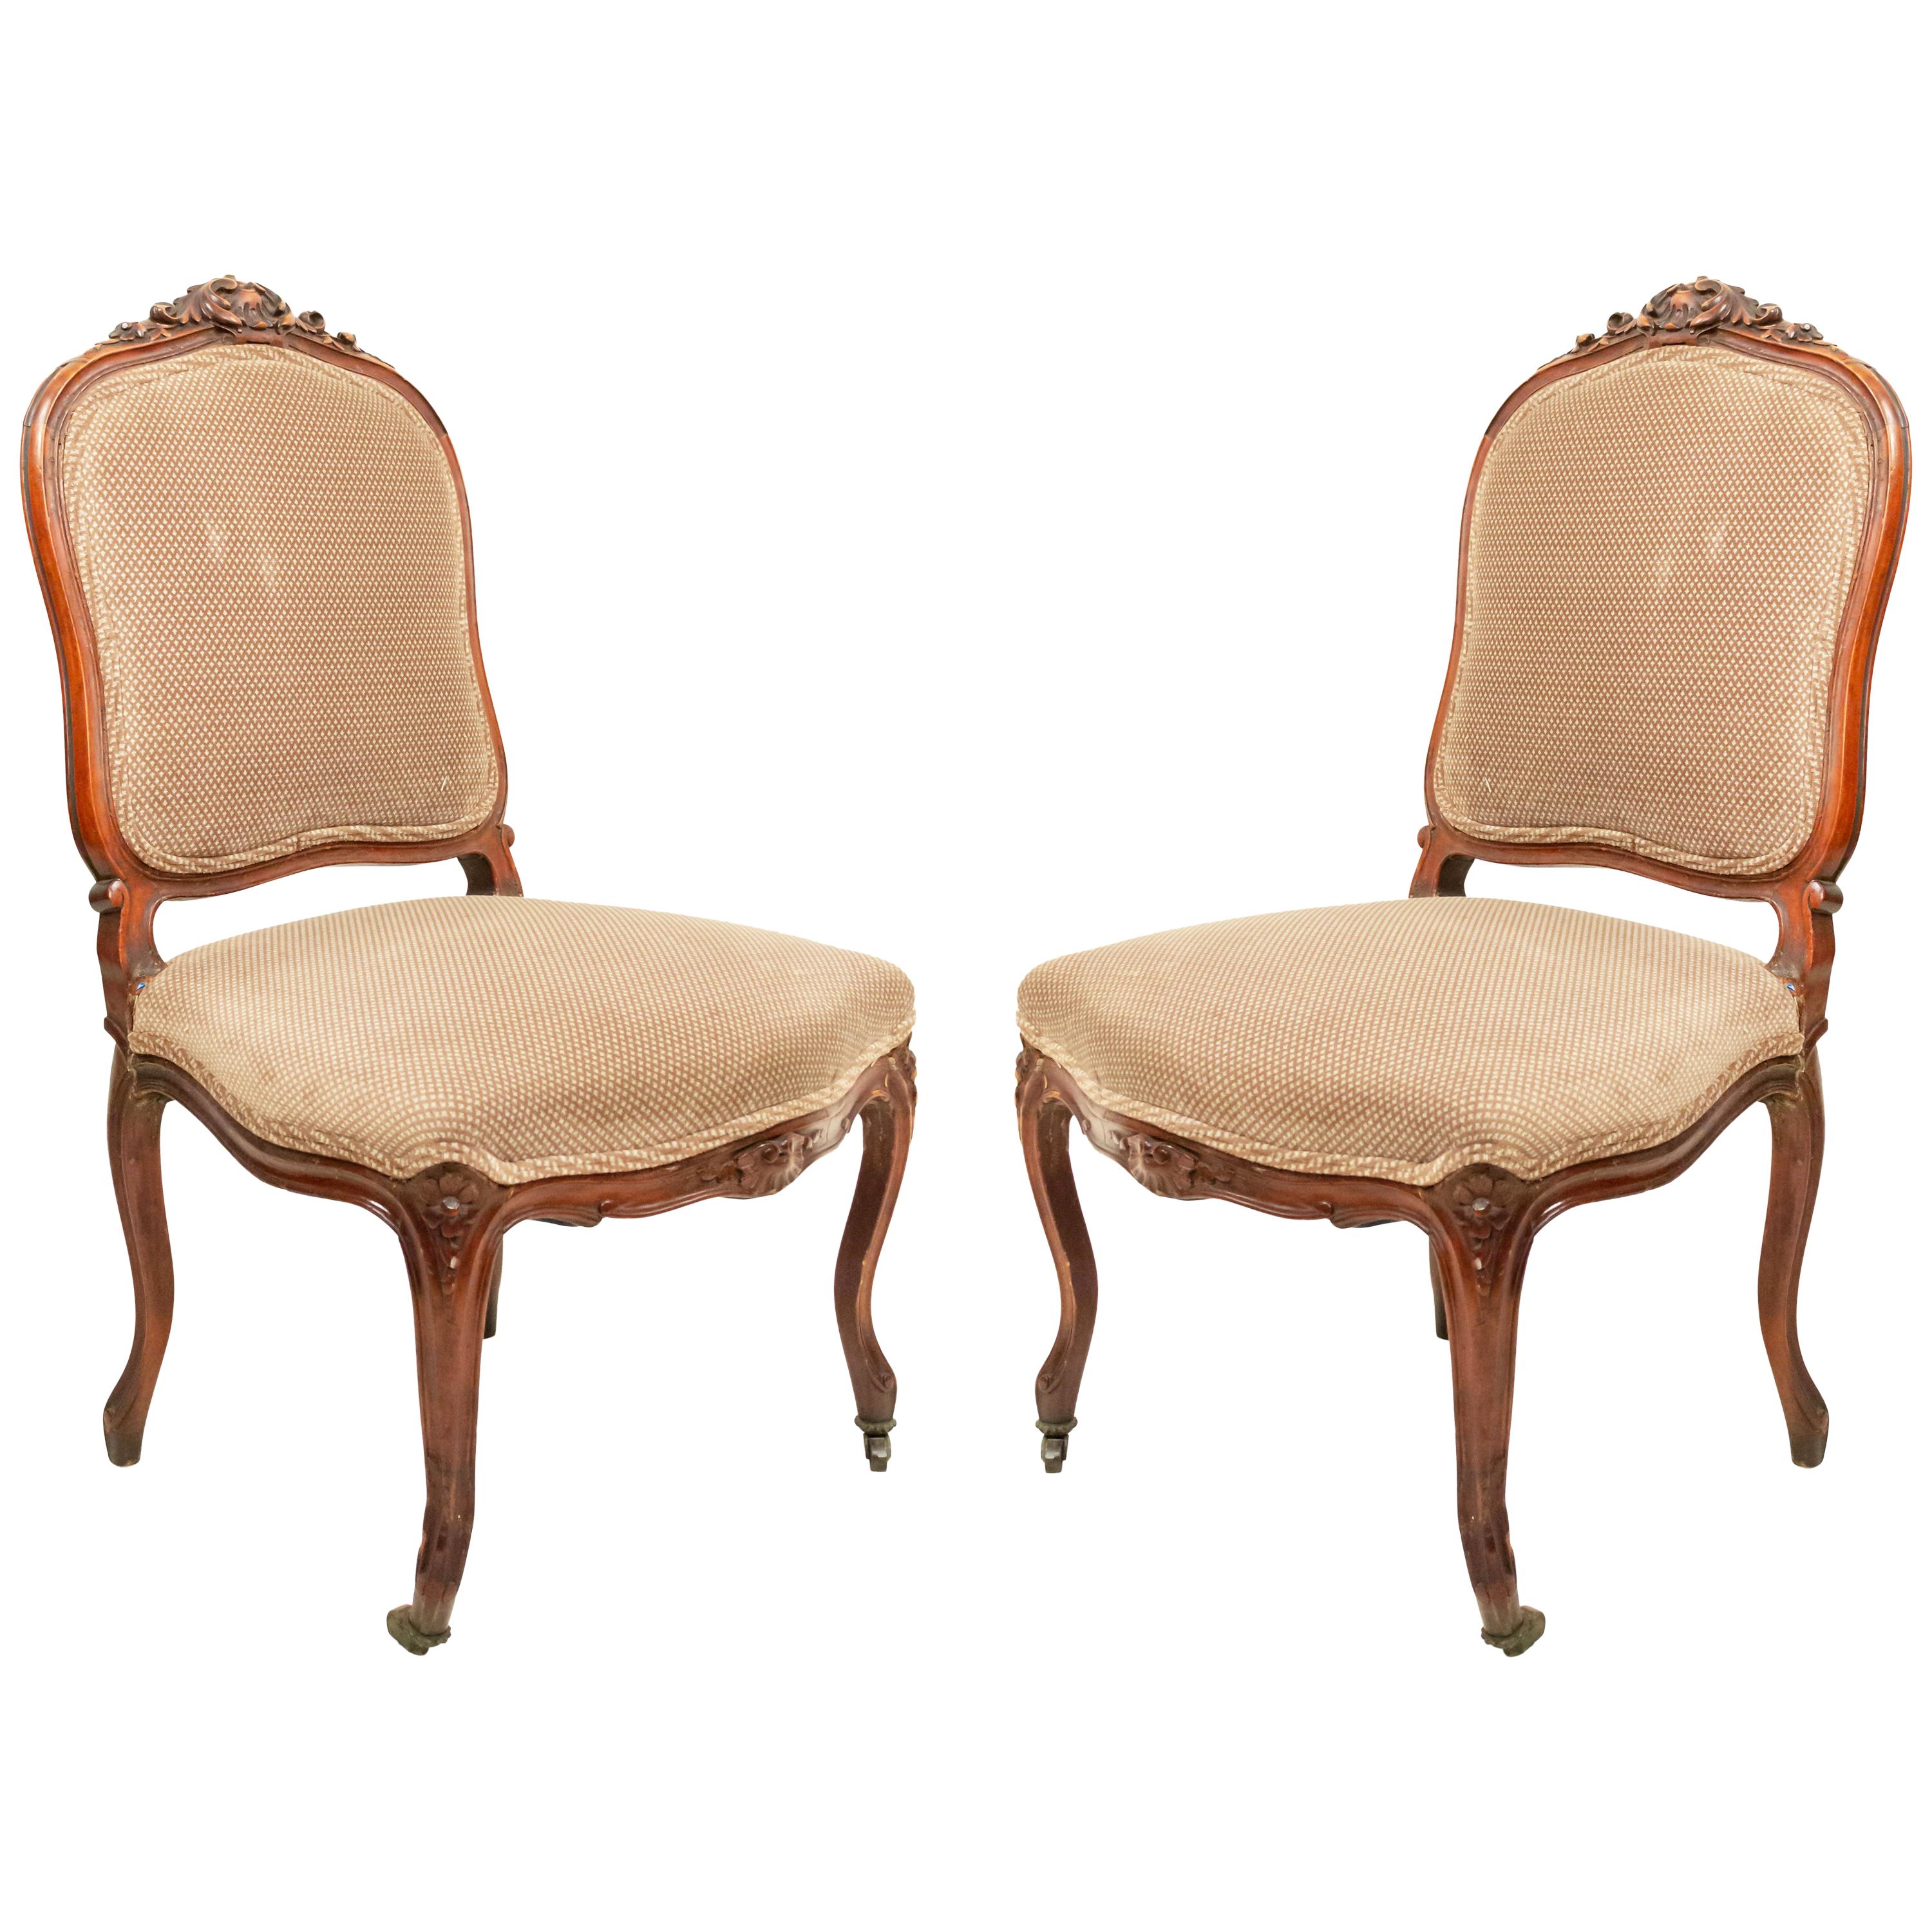 French Louis XV Walnut Side Chairs